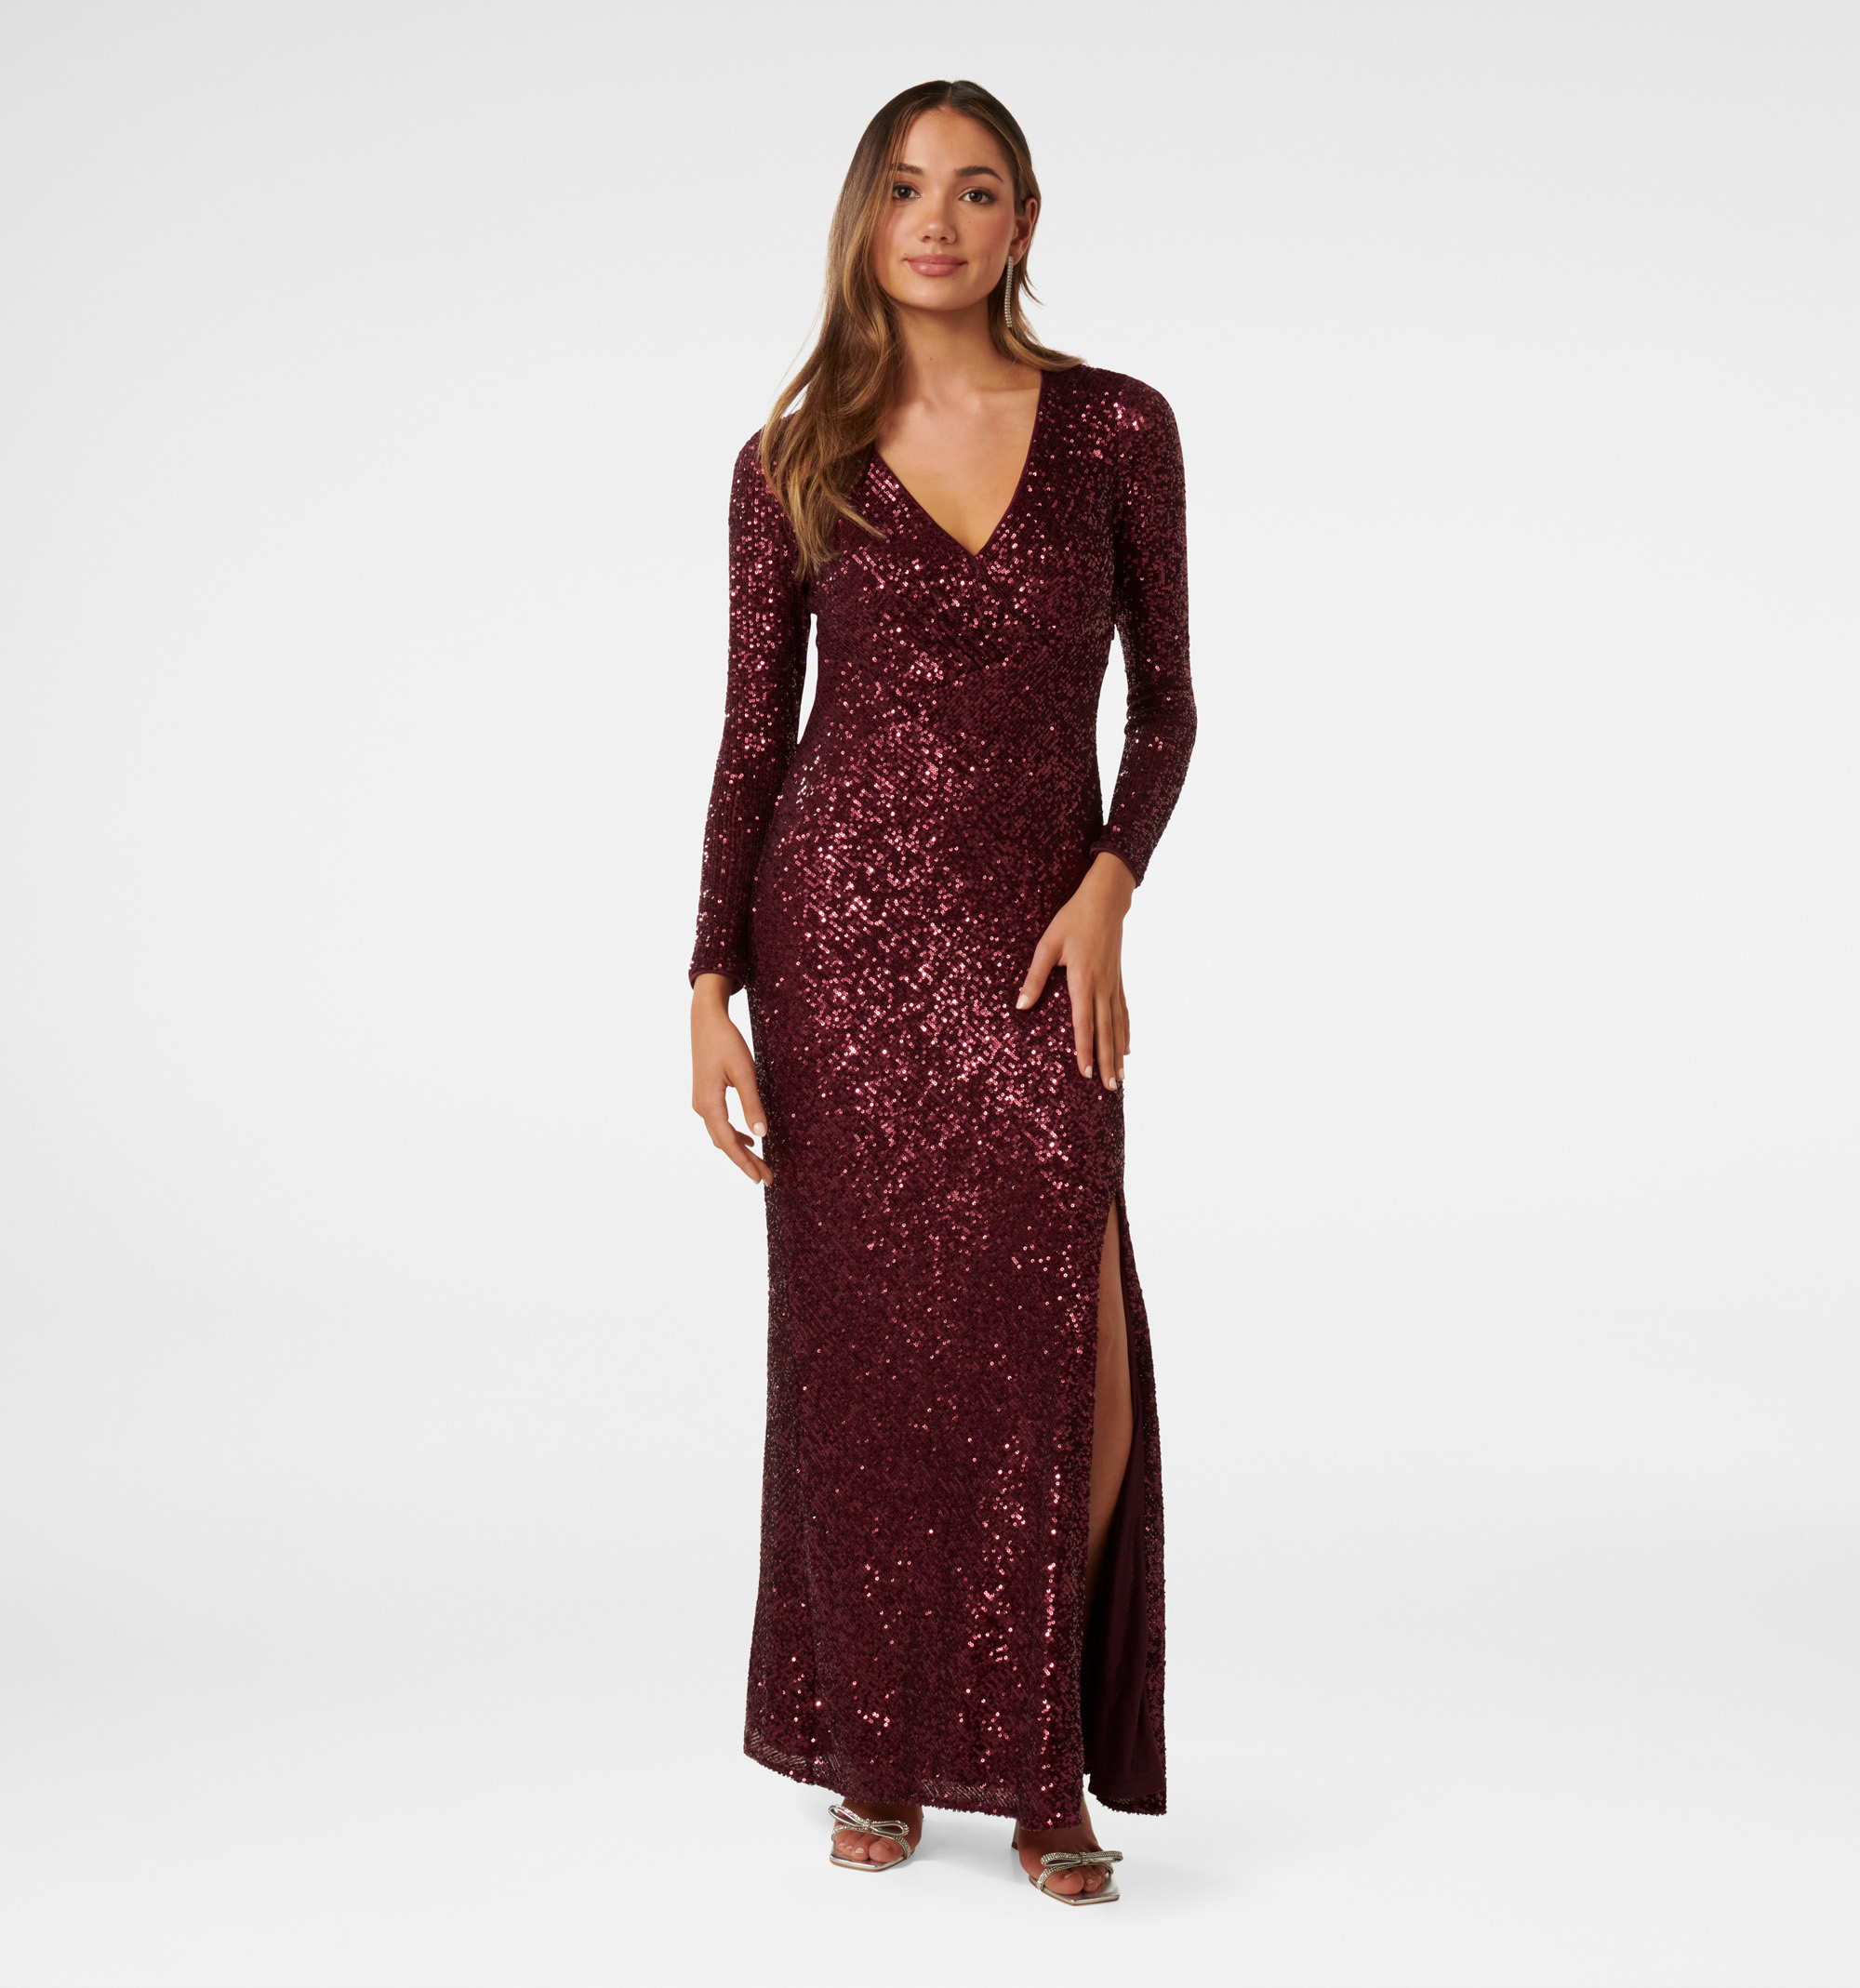 Champagne Love Lasts Forever Champagne Sequin Long Sleeve Maxi Dress |  Azazie